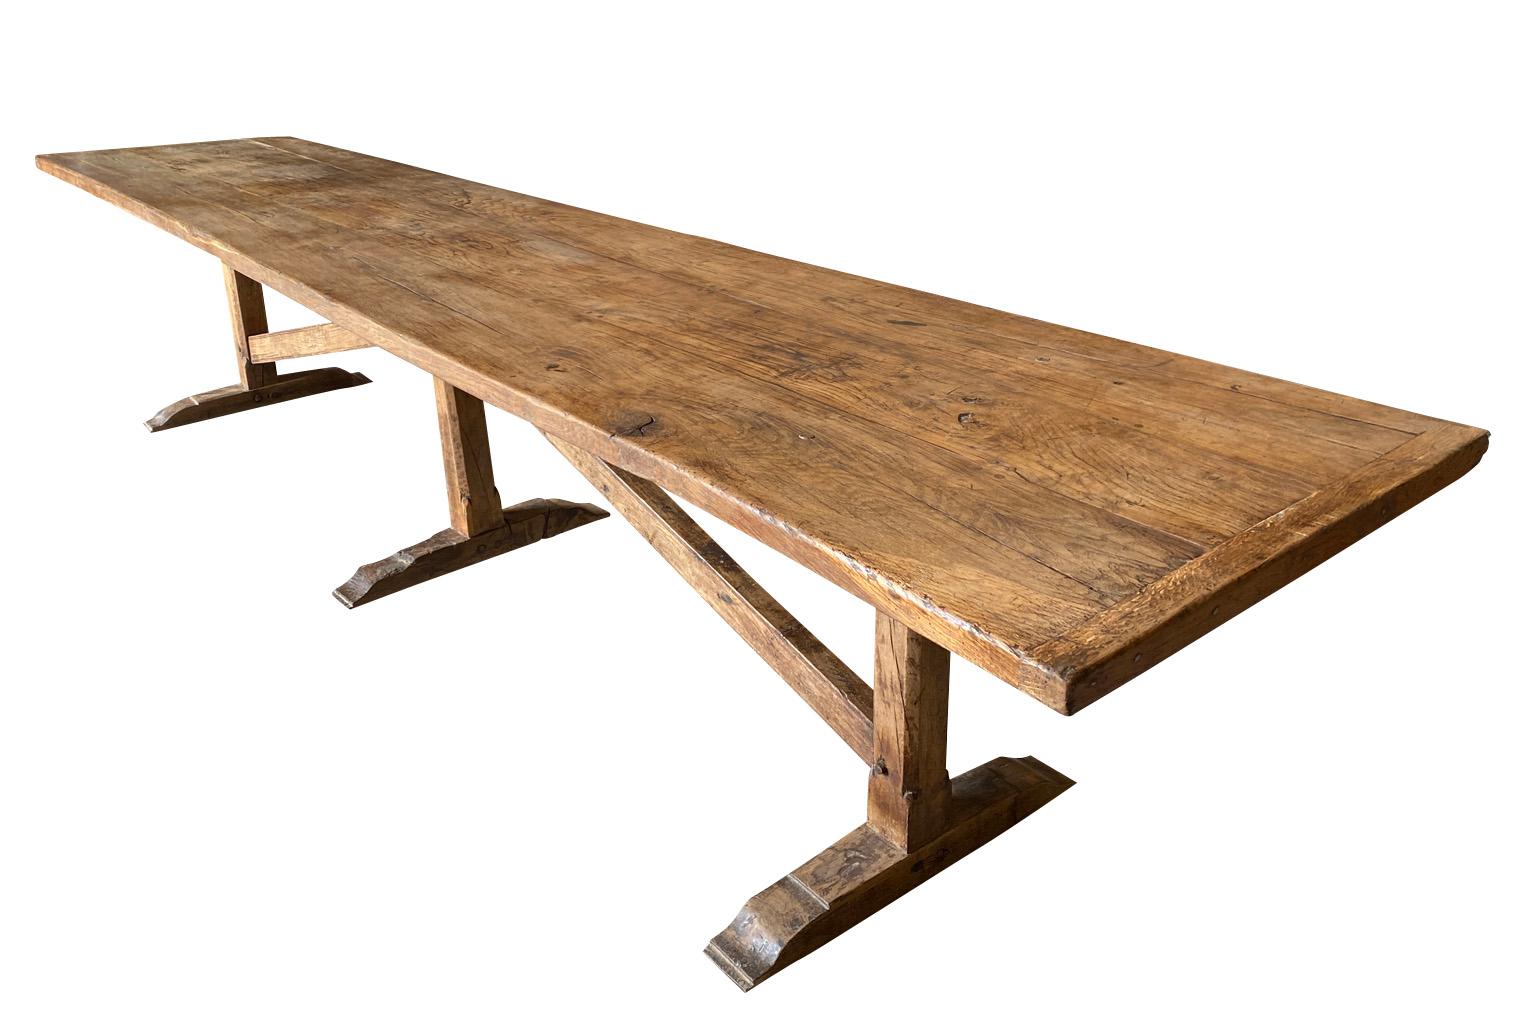 A monumental and stunning 18th century Farm Table - Dining Table from the Southwest of France.  Beautifully constructed from handsome chestnut with angled stretchers and wonderfully shaped feet.  Outstanding patina and graining.